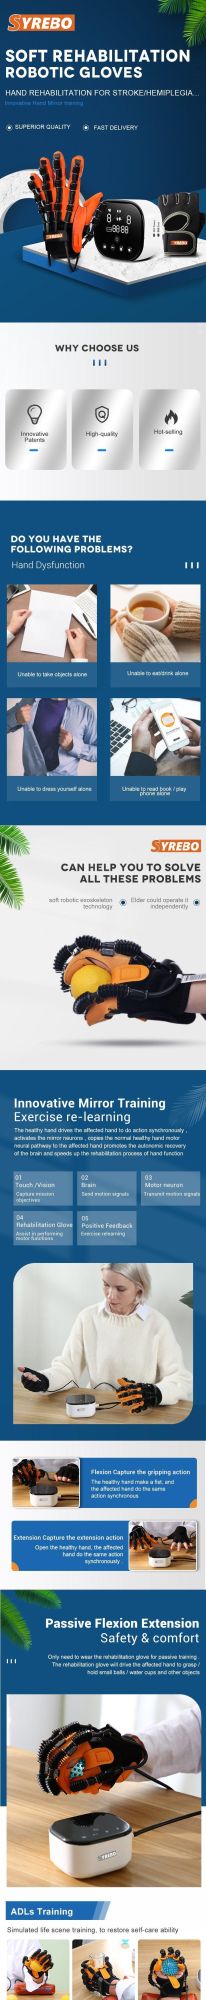 Hot Sale Physiotherapy Equipment Stroke Hand Rehabilitation Robot Recovery Robotic Glove